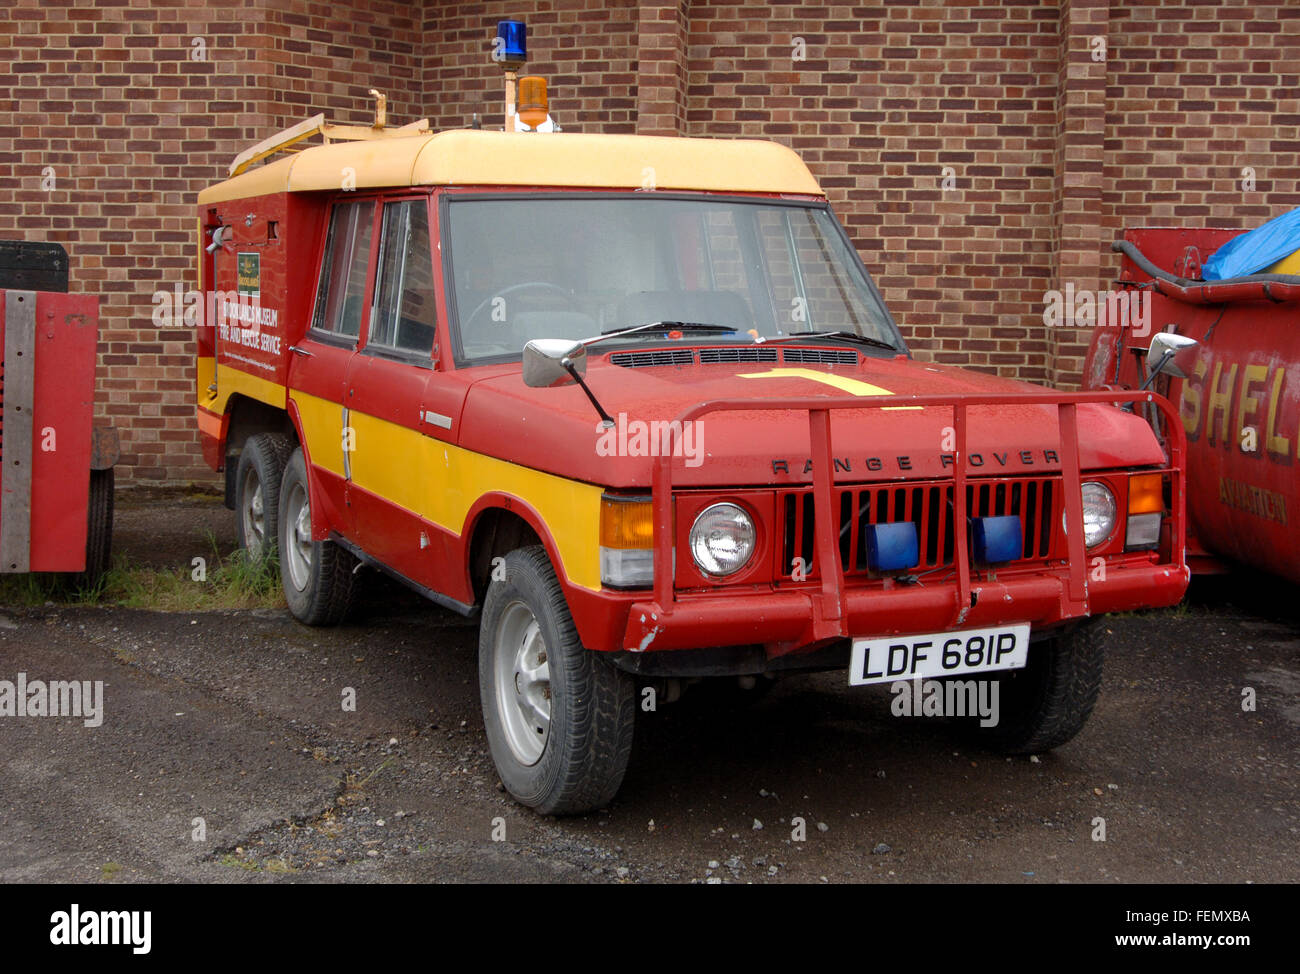 6 wheel 1973 Range Rover fire tender, Carmichael converted for an airport emergency crew Stock Photo